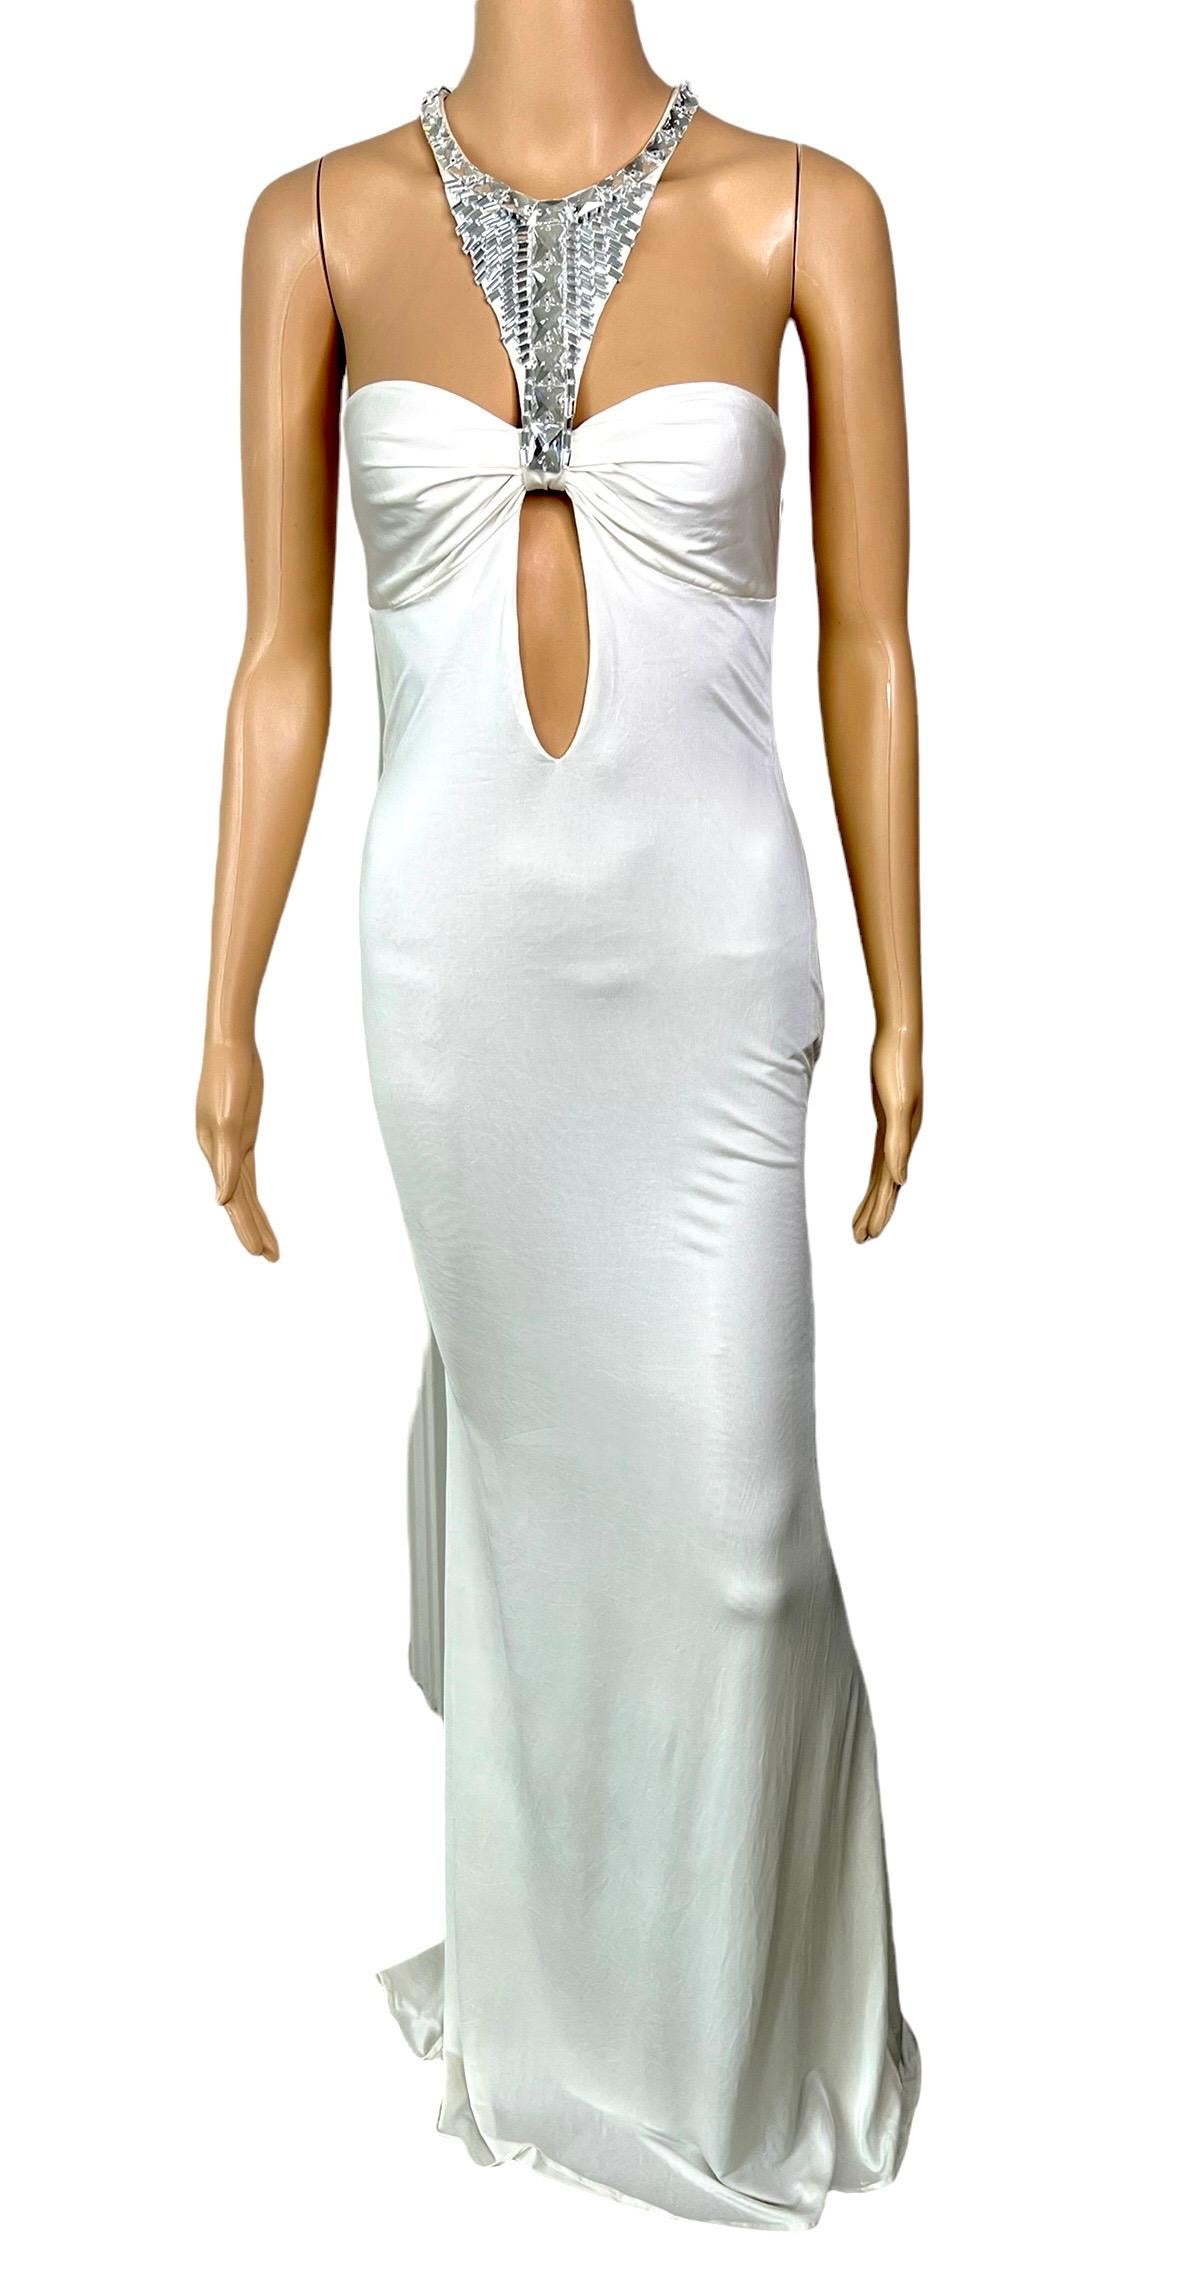 Tom Ford for Gucci F/W 2004 Embellished Plunging Cutout Ivory Evening Dress Gown For Sale 2